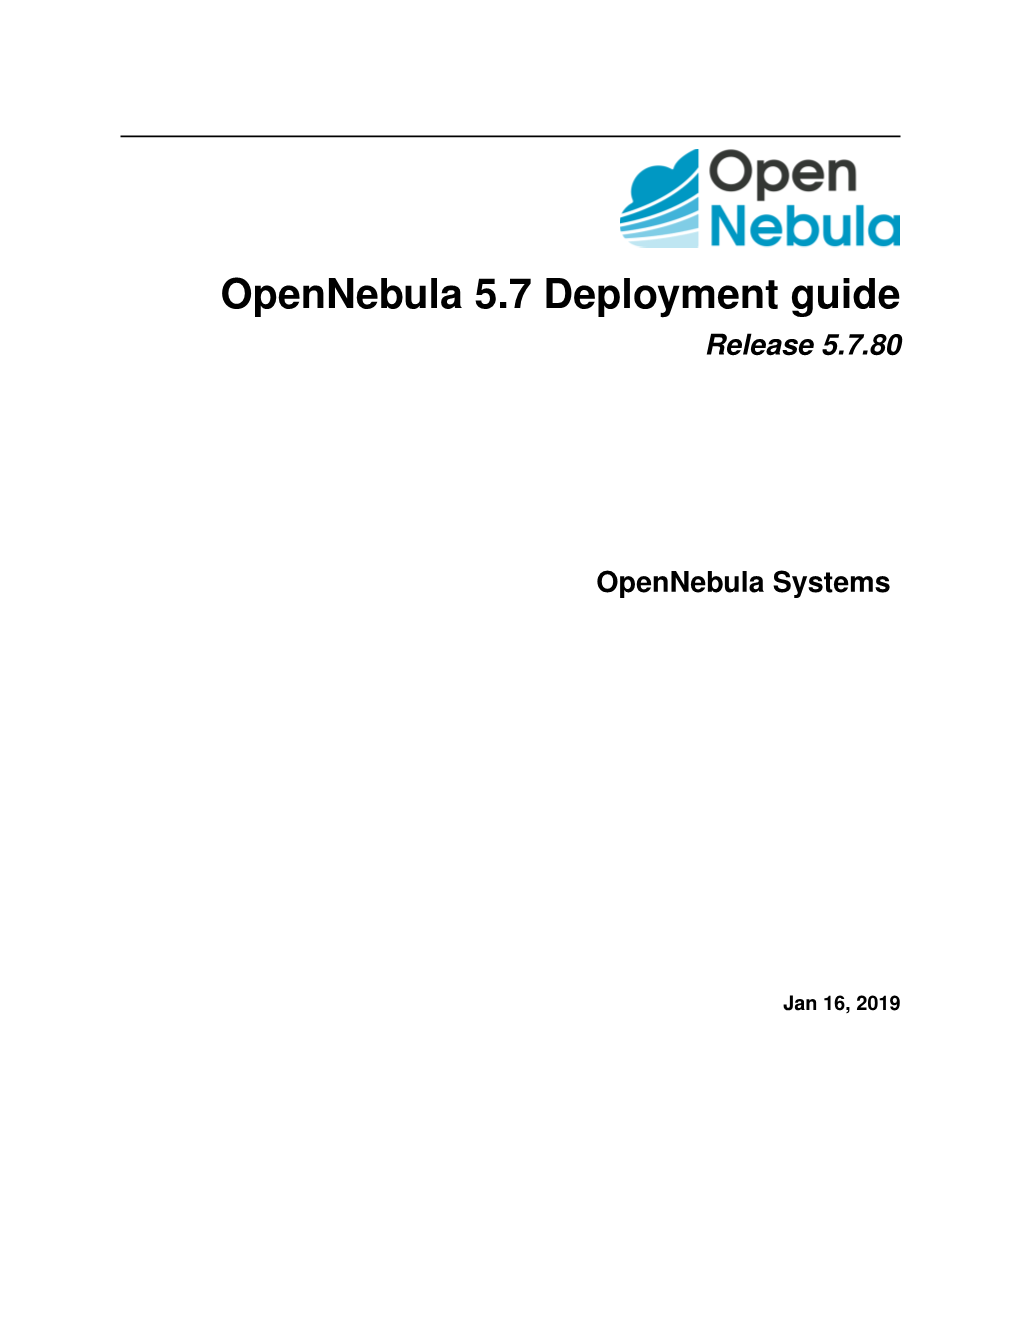 Opennebula 5.7 Deployment Guide Release 5.7.80